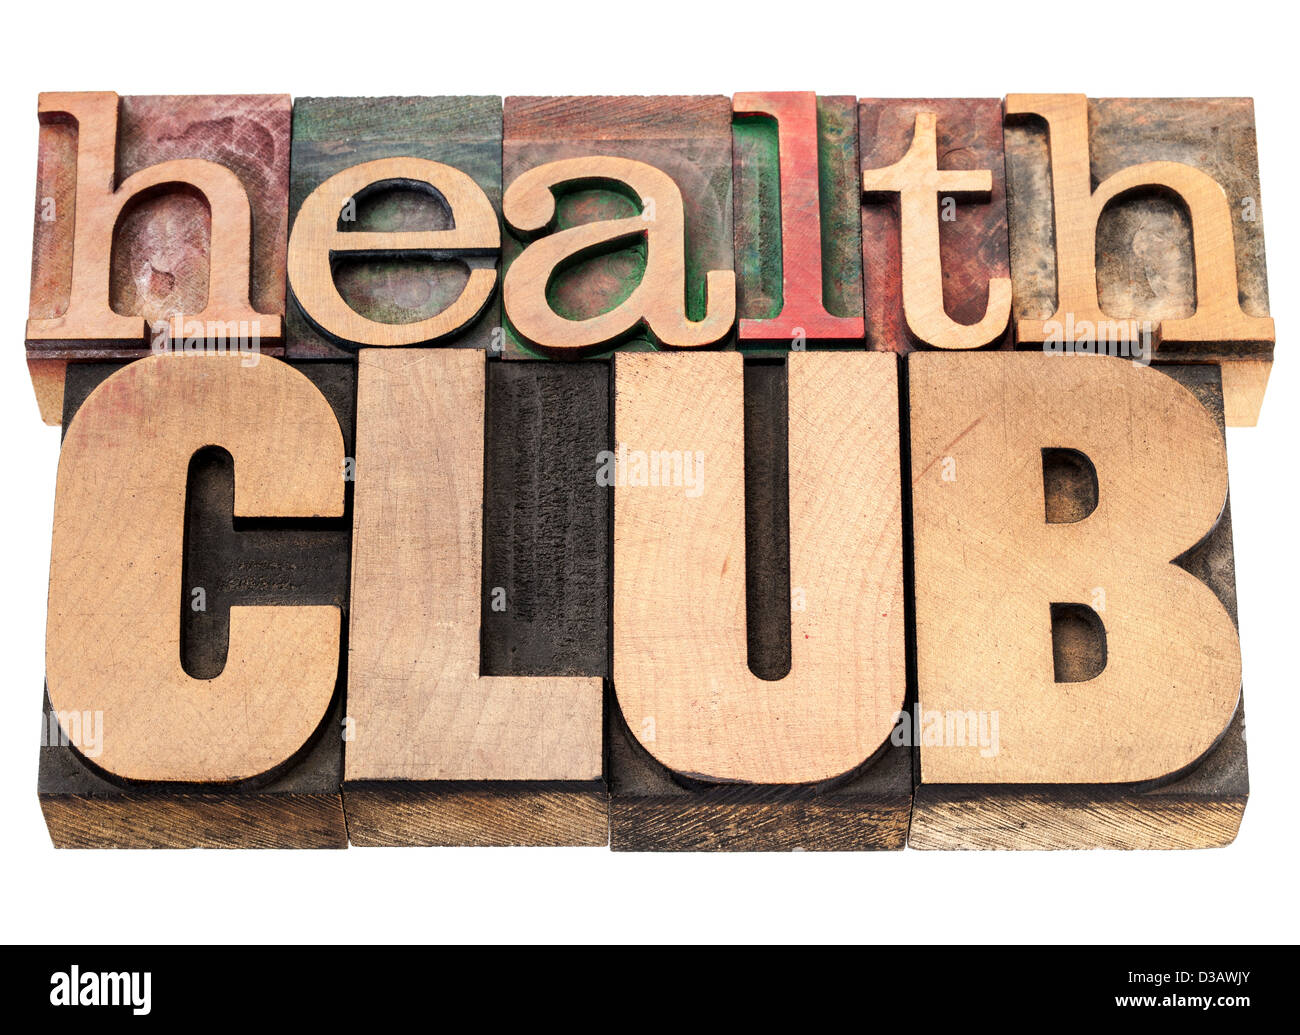 health club - isolated text in vintage letterpress wood type printing blocks Stock Photo